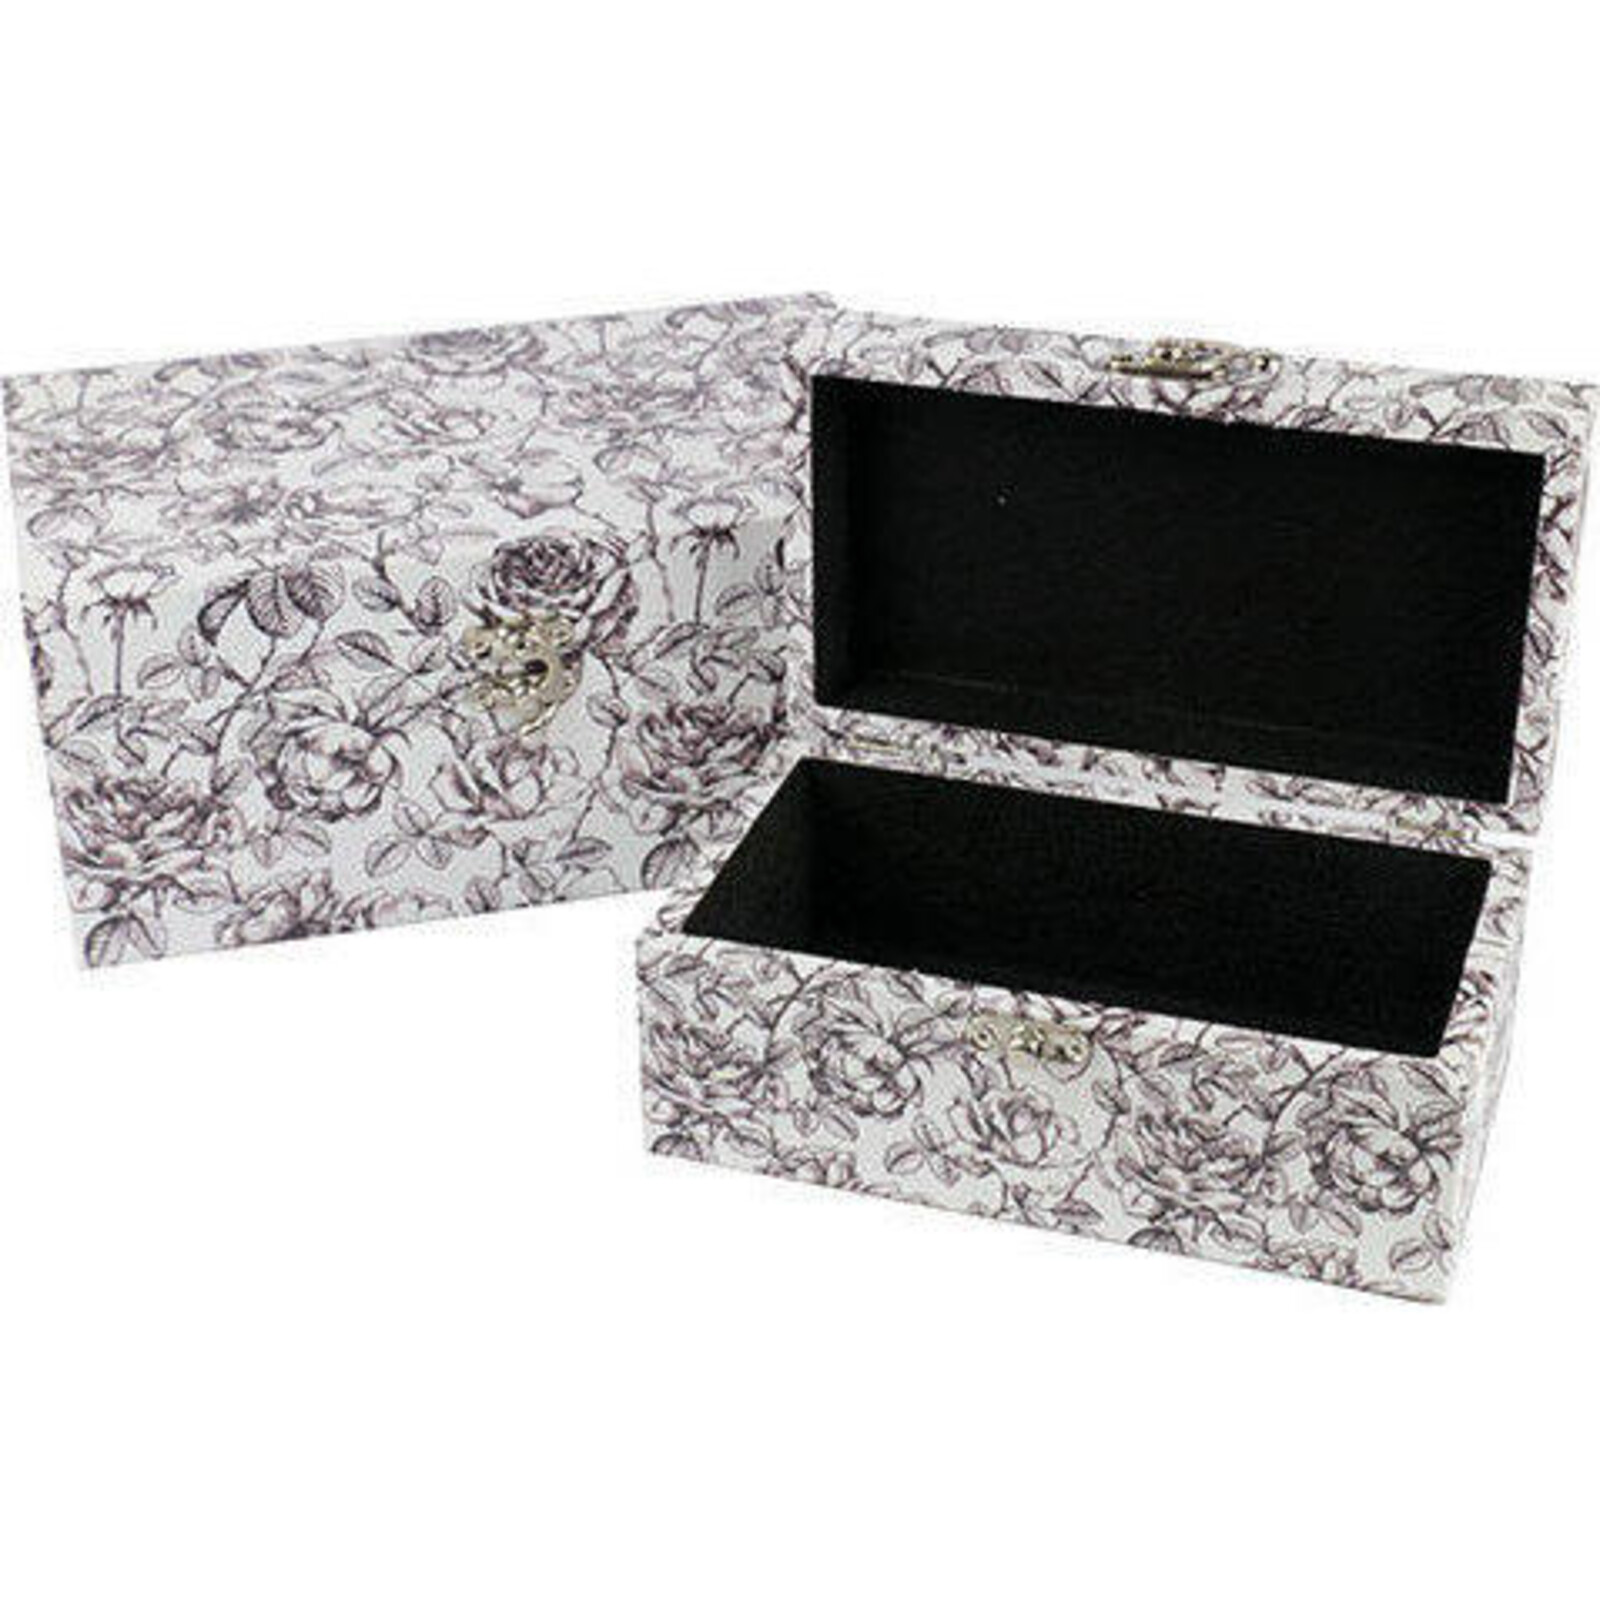 Boxes Flower Toile Sm S/2